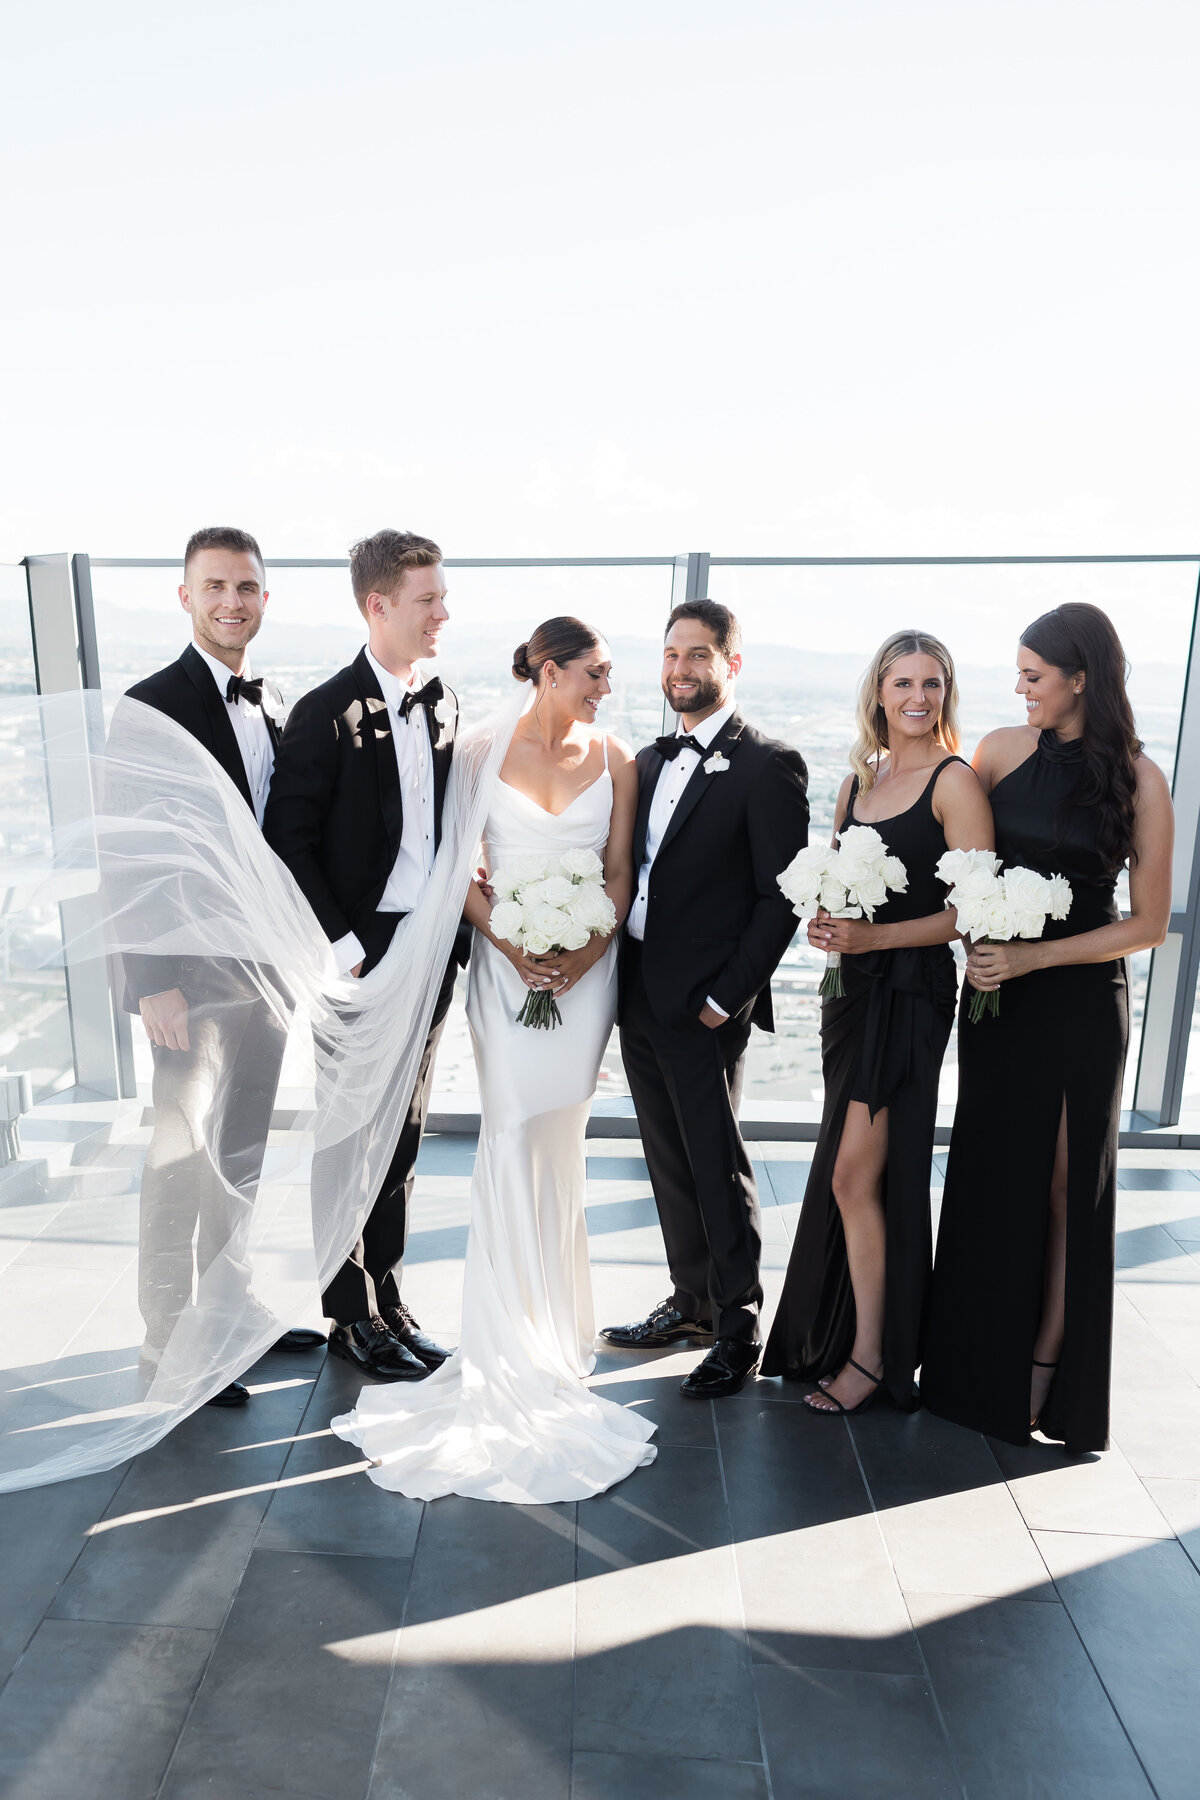 Luxe Black and White Wedding at Palms Casino Resort in Las Vegas - 21